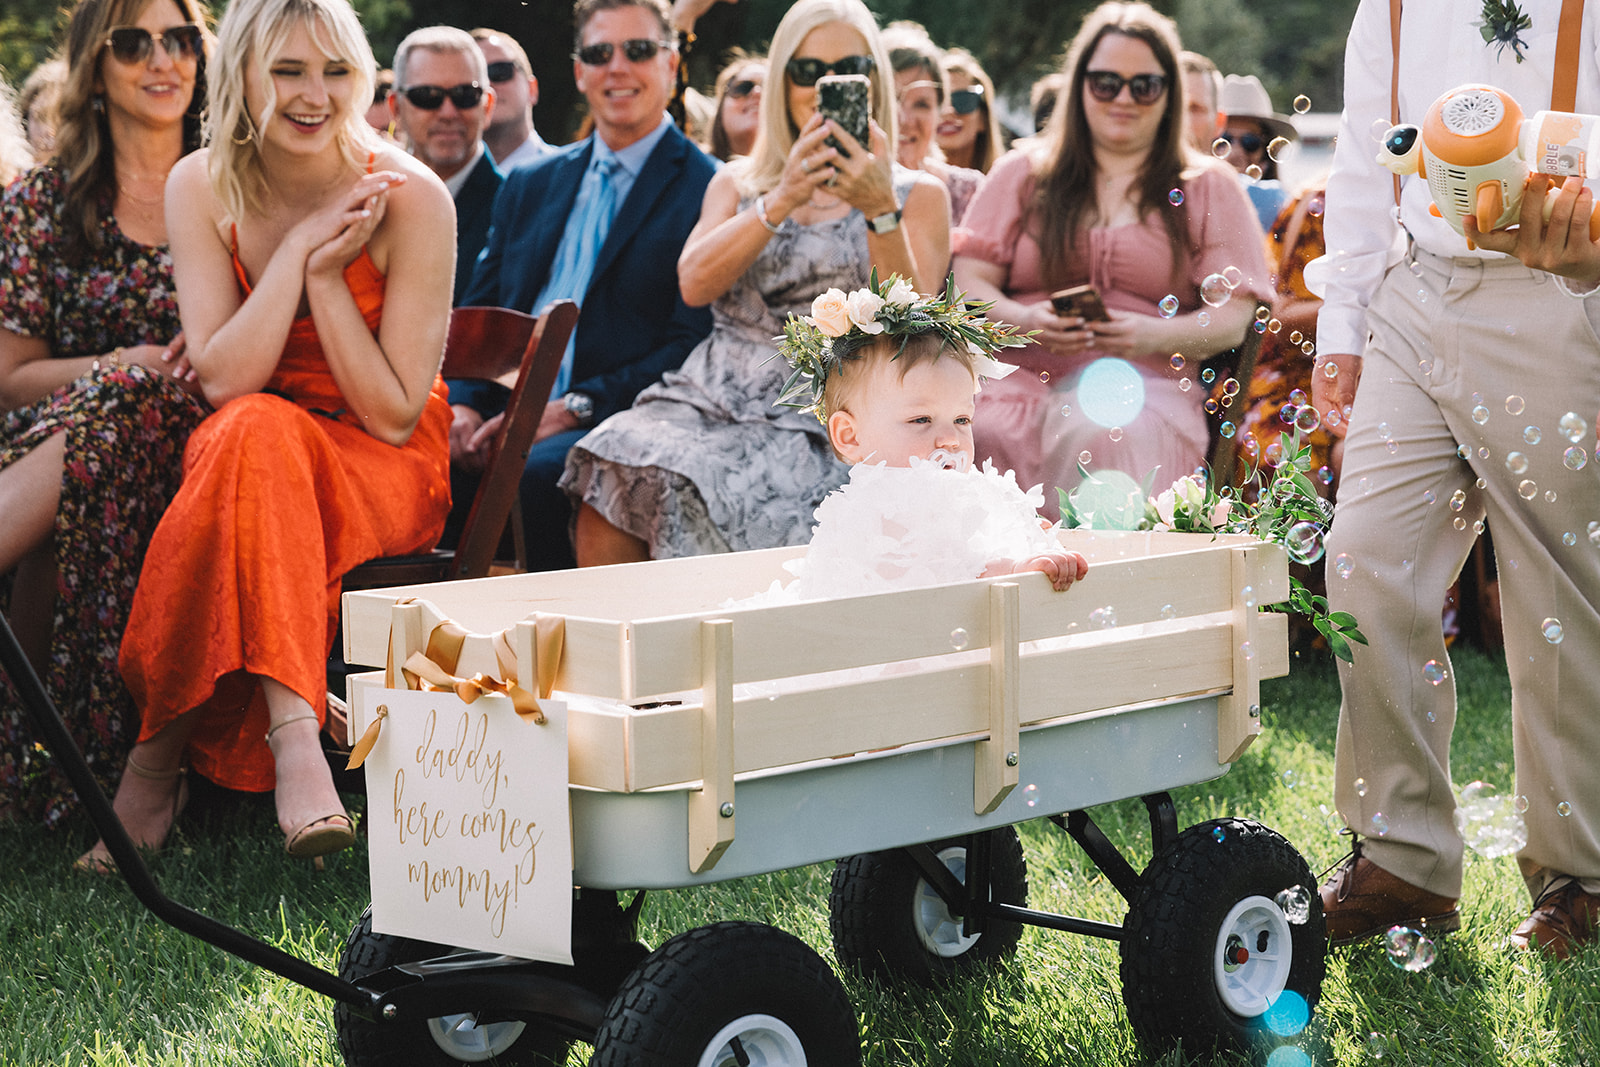 Couple included their baby in the wedding ceremony with an adorable wagon ride and bubbles